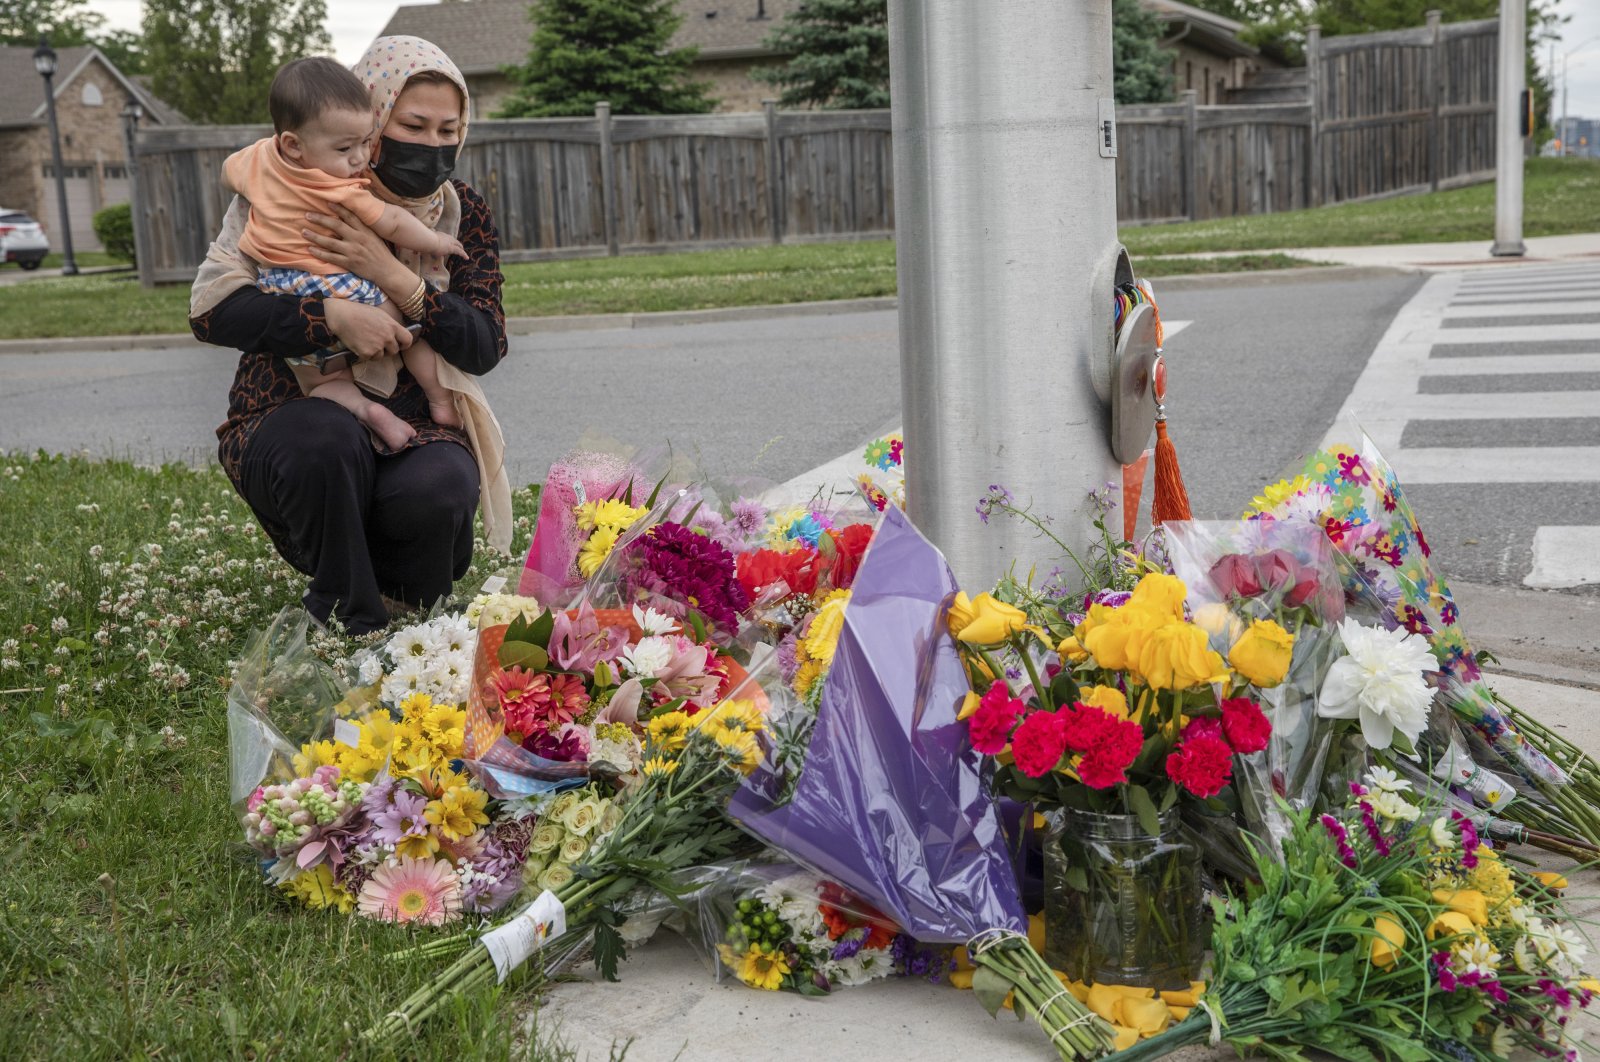 Nafisa Azima and her daughter Seena Safdari attend a memorial at the location where a family of five was hit by a driver, in London, Ontario, Monday, June 7, 2021. (AP Photo)